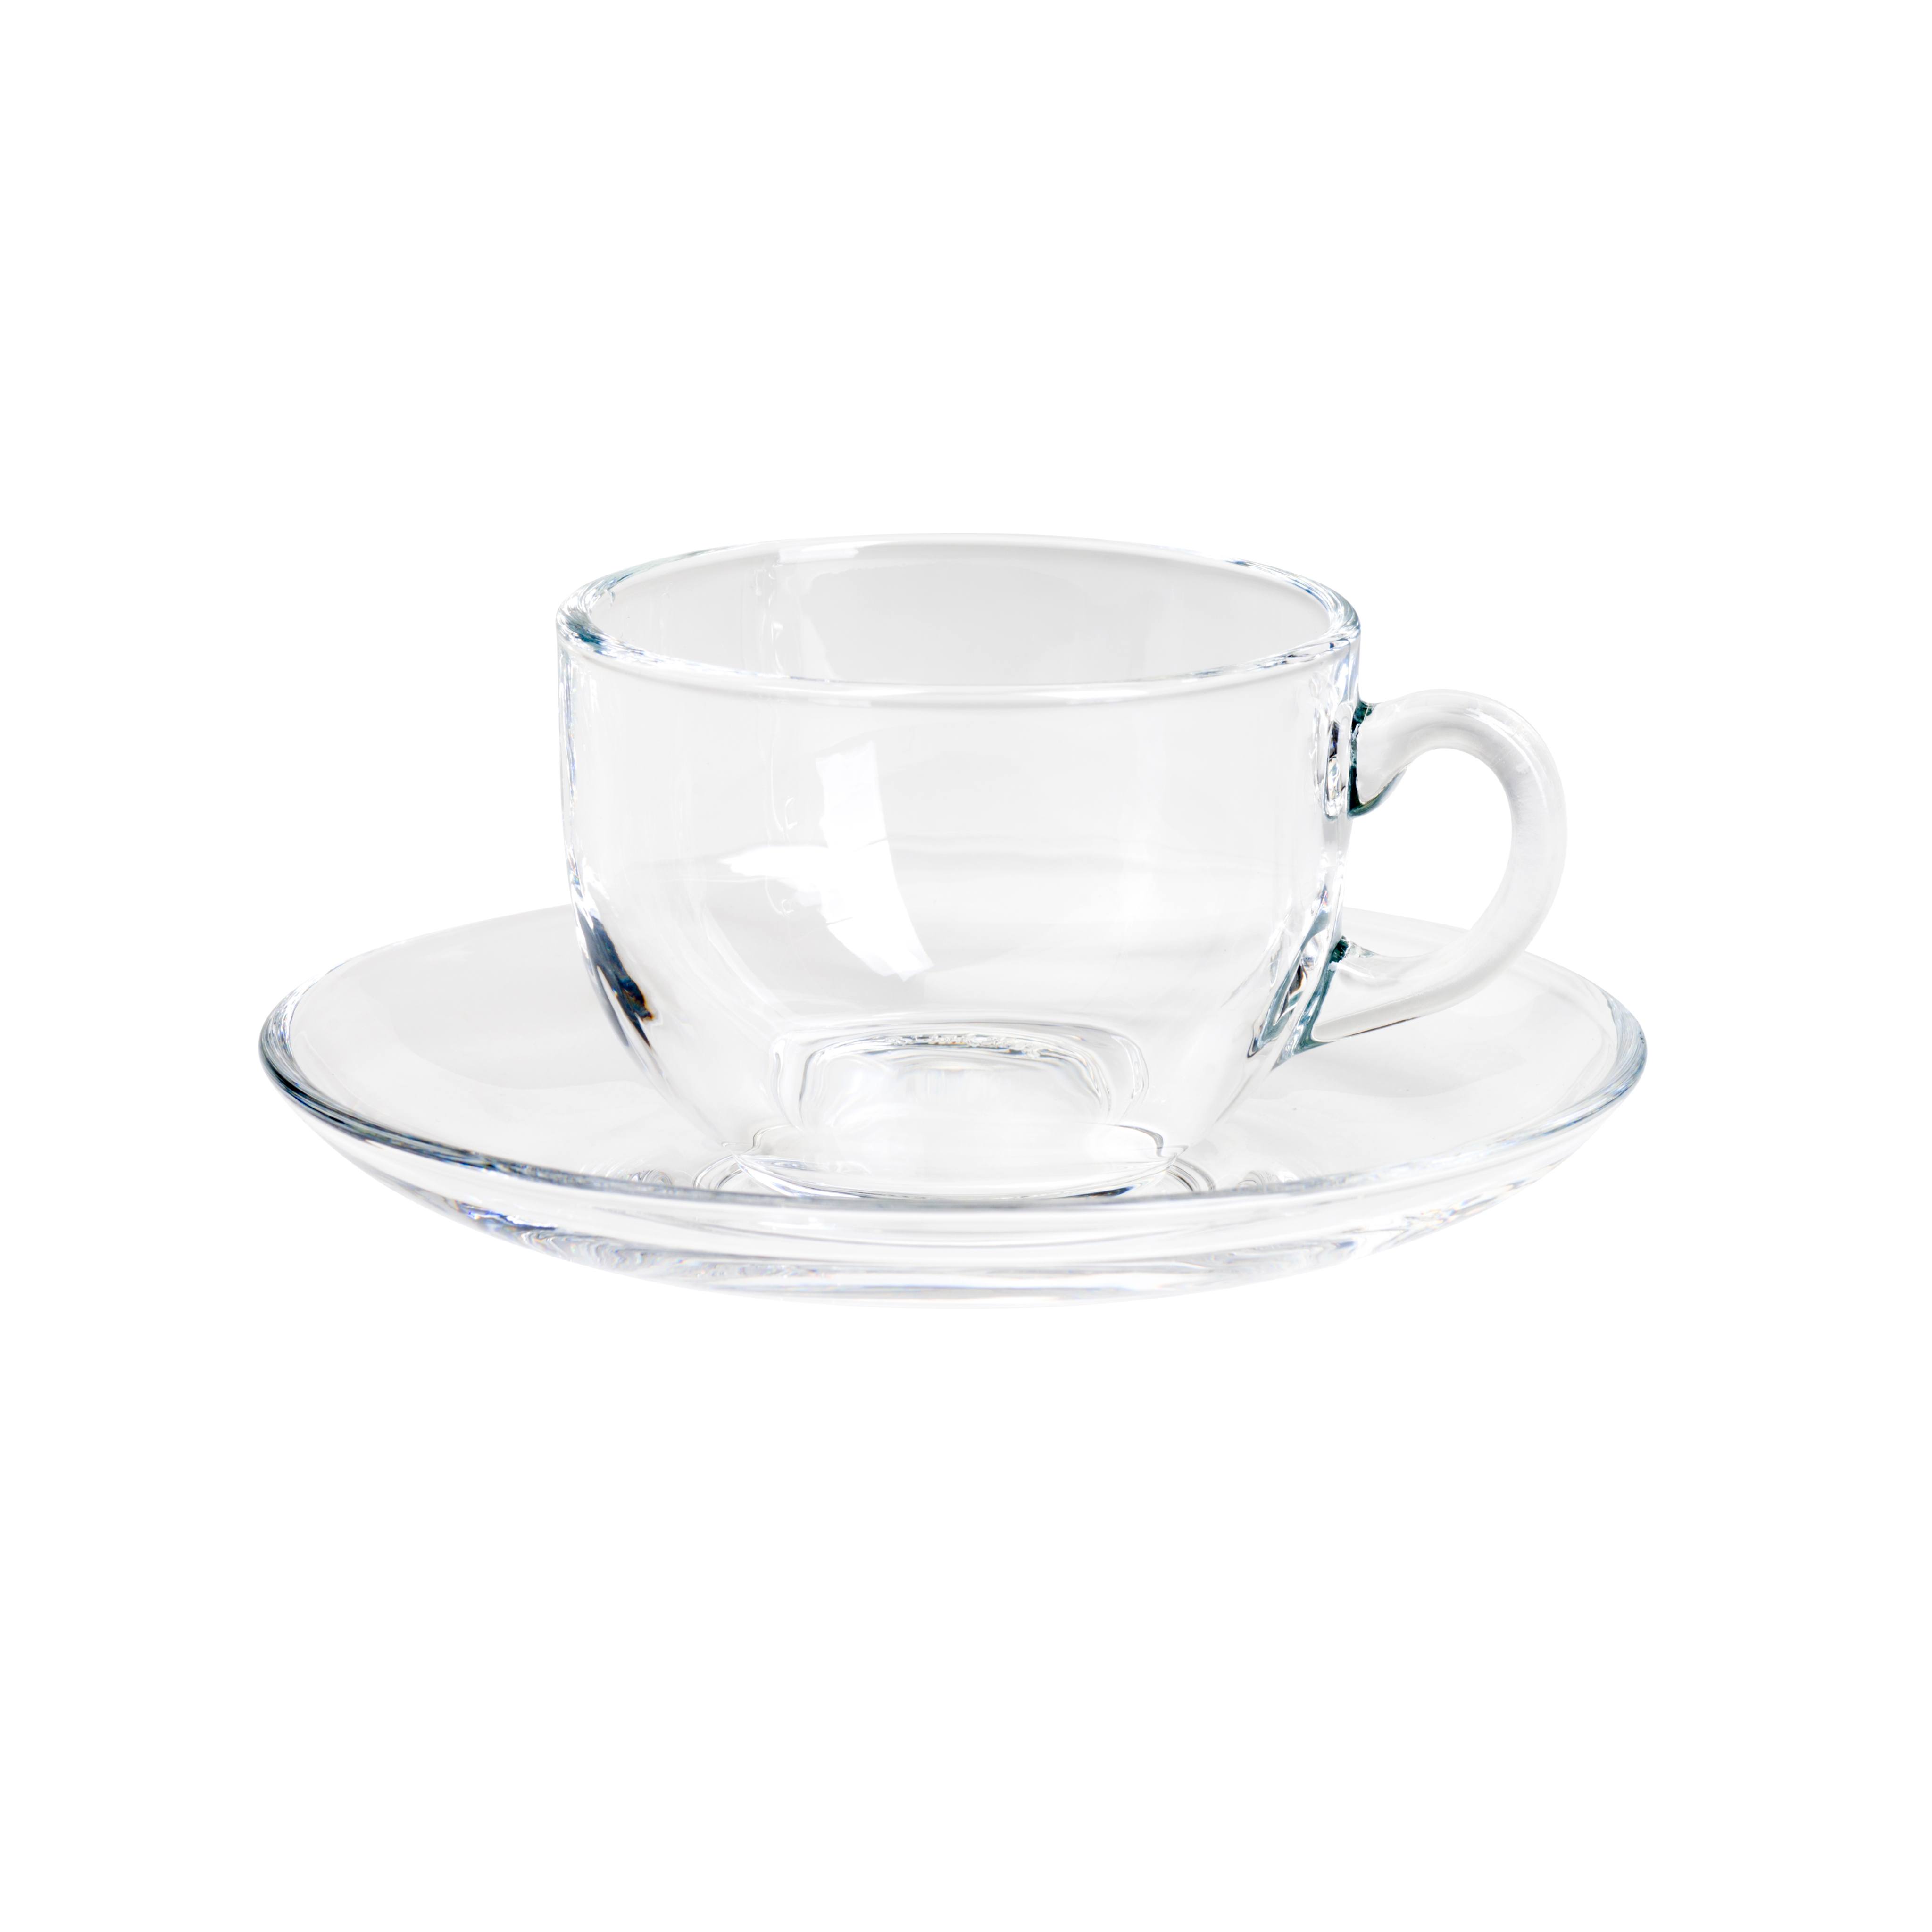 https://www.thehopeandglory.co.uk/wp-content/uploads/2019/05/small-teacup.jpg